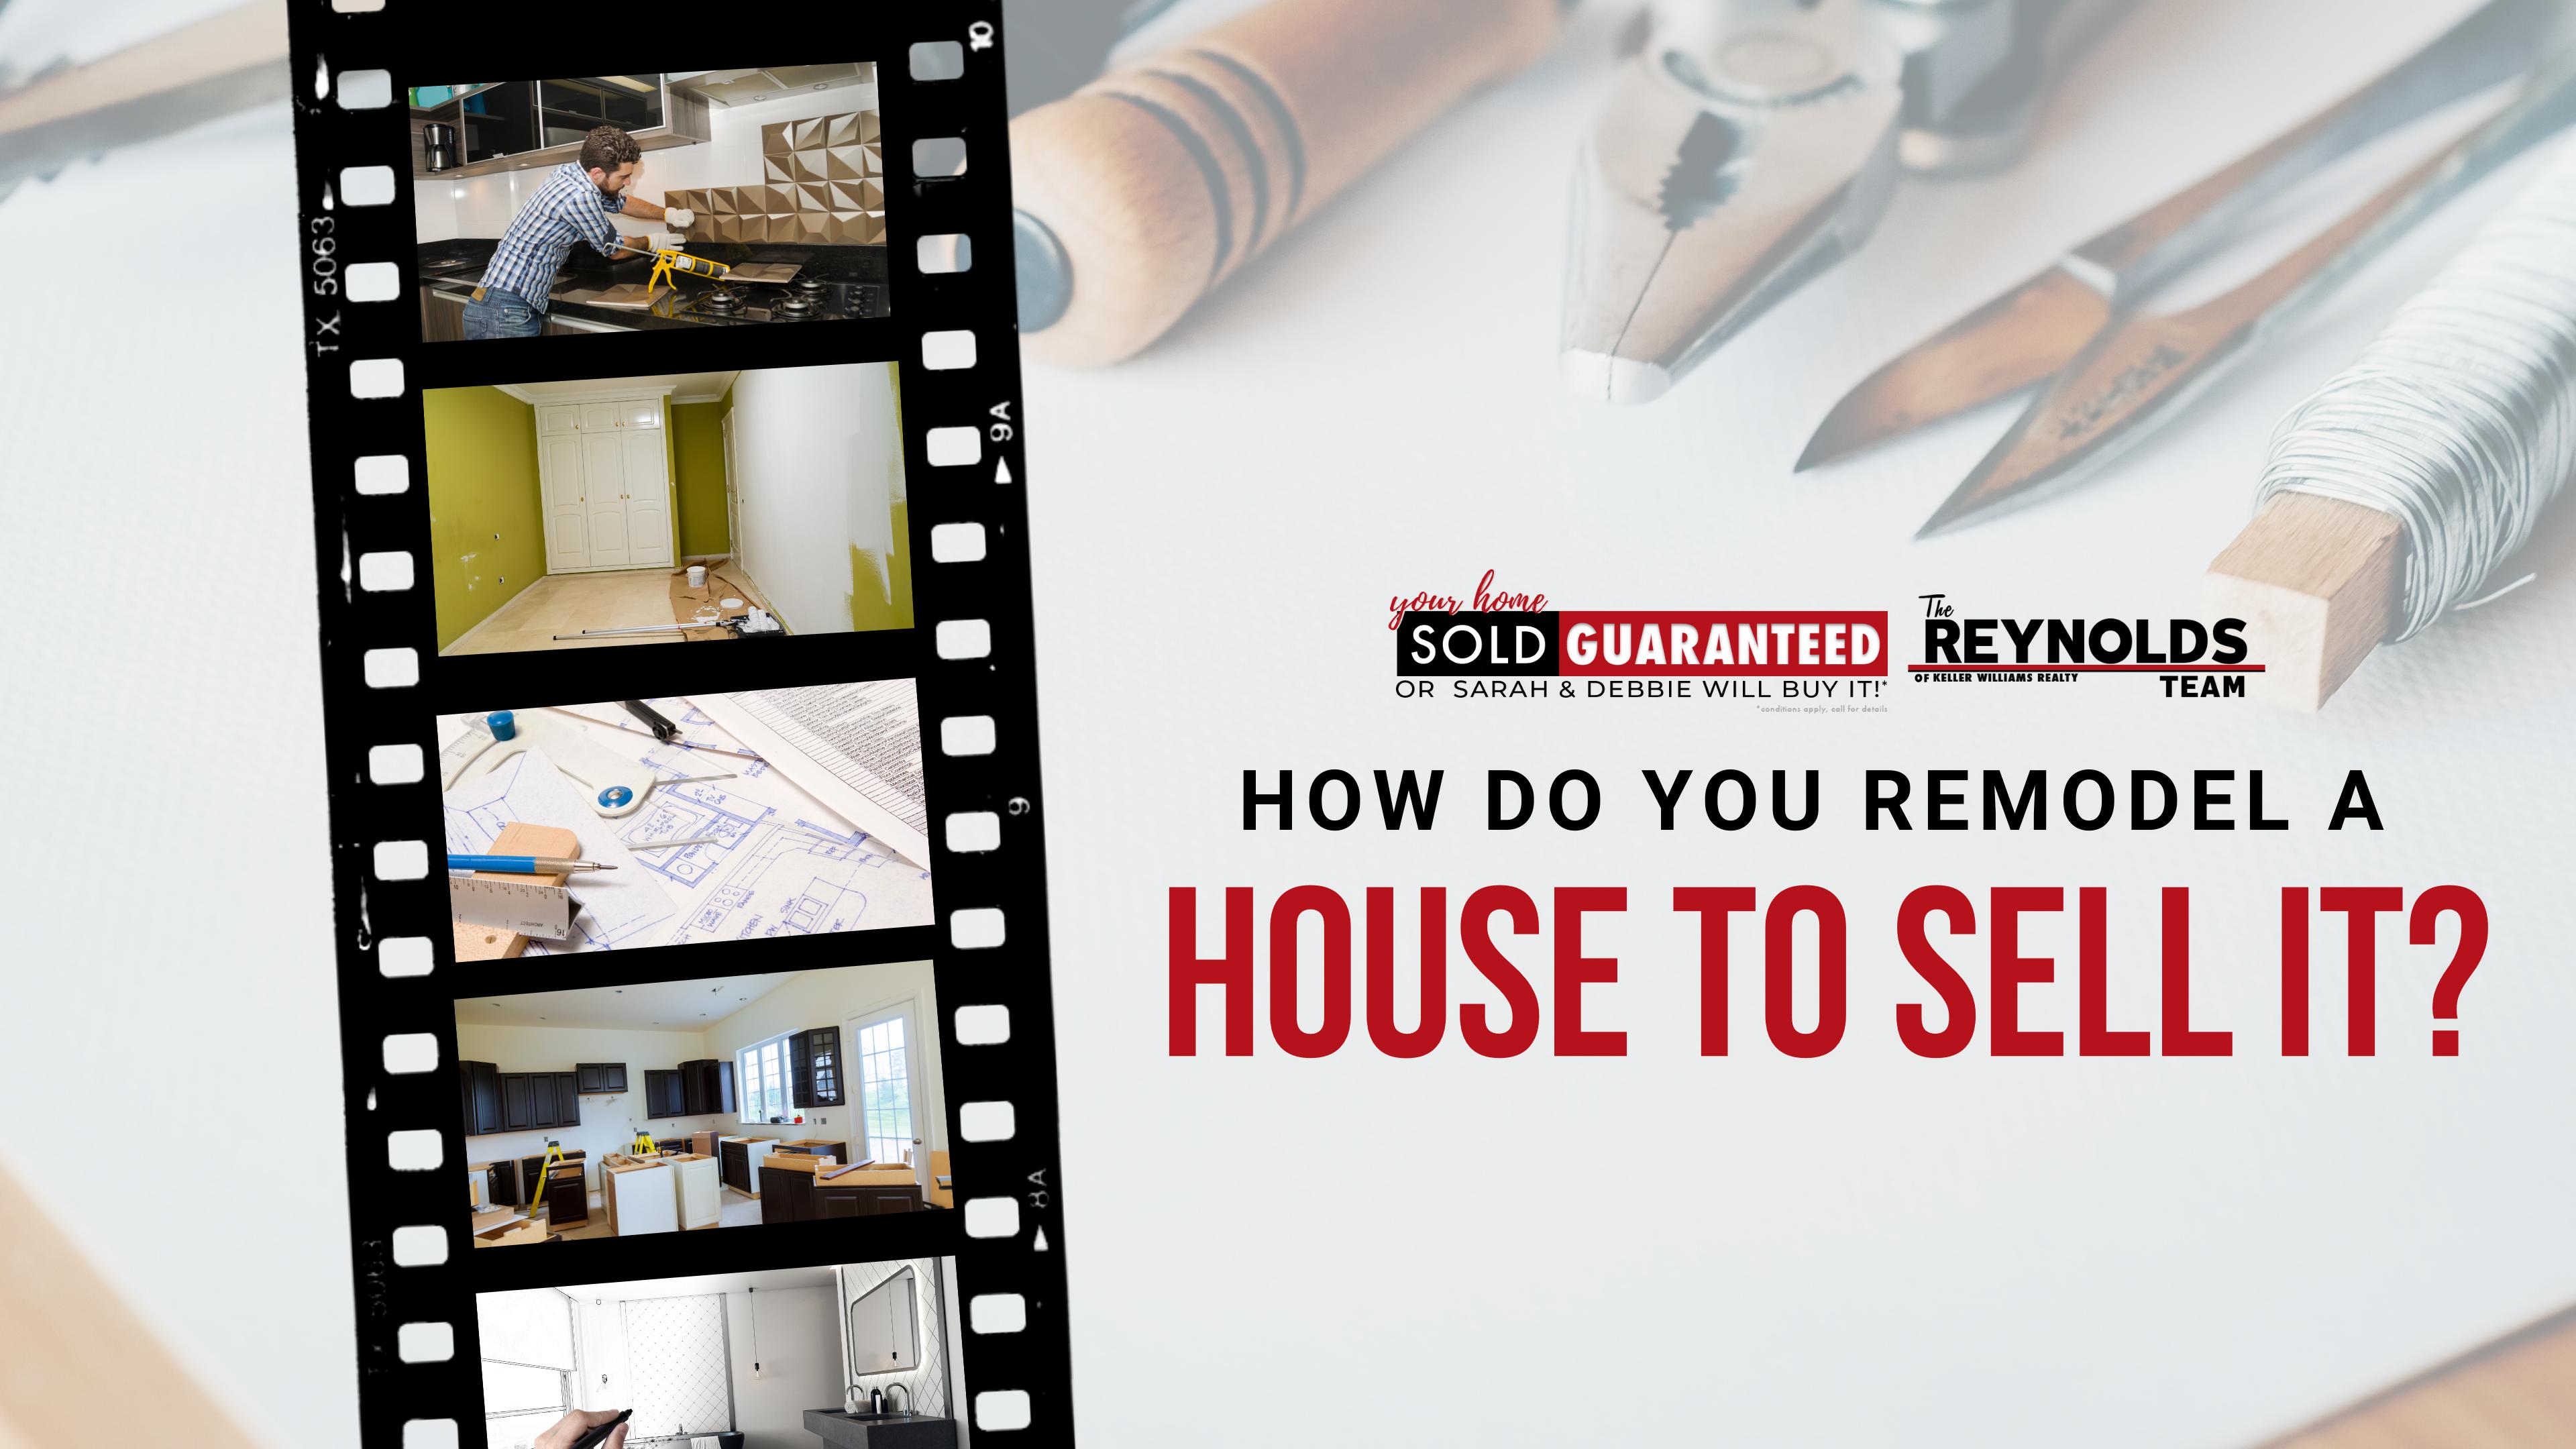 How do you remodel a house to sell it?